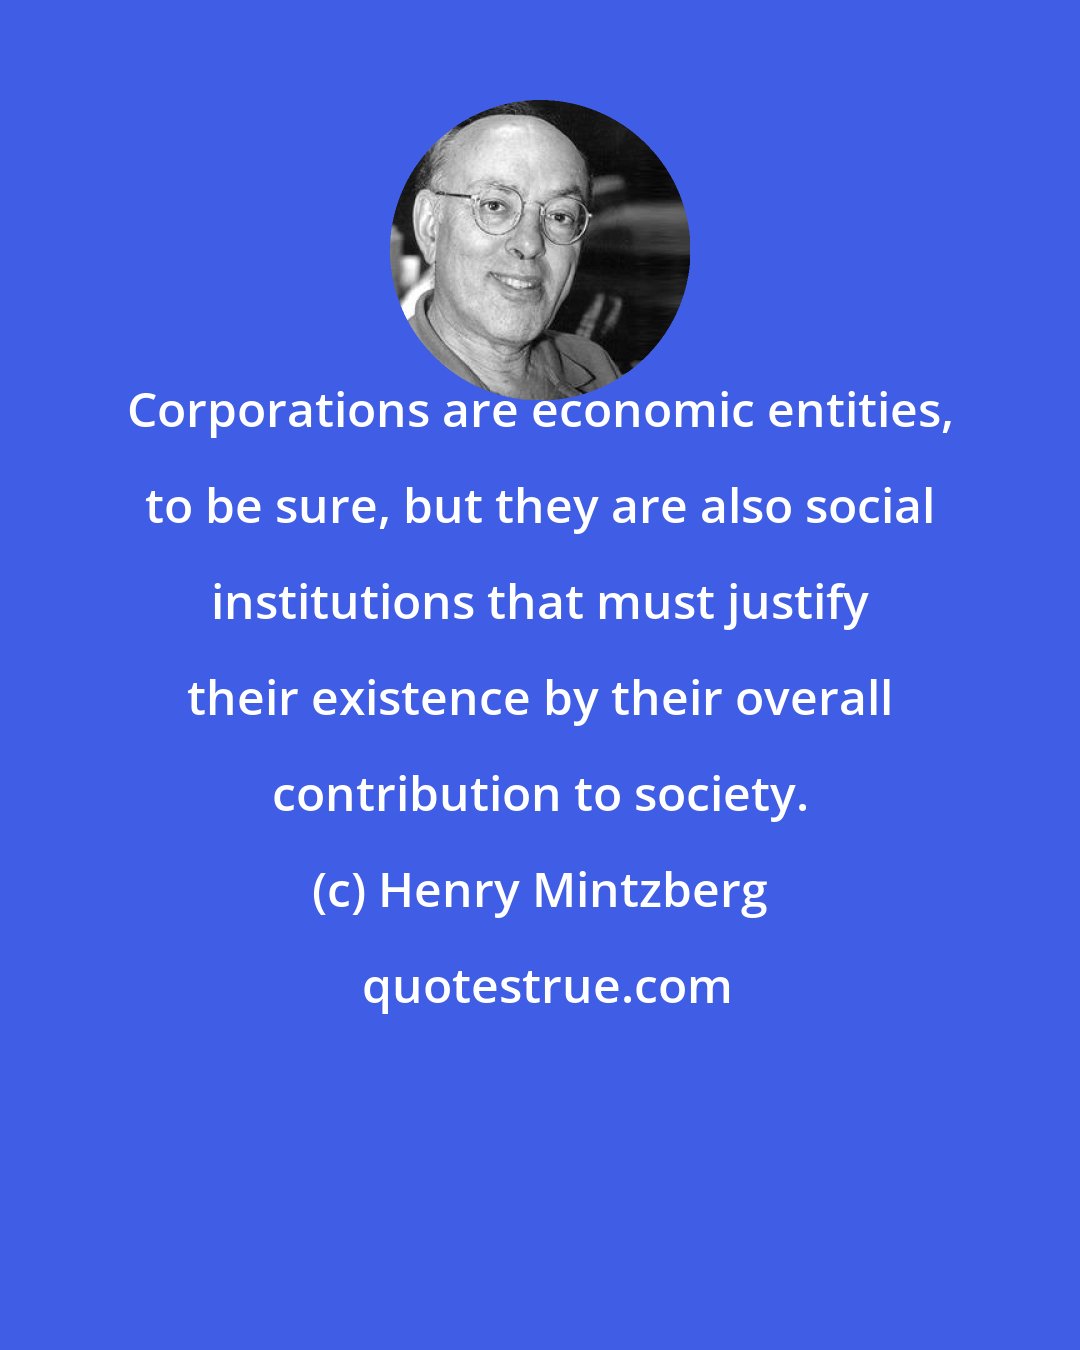 Henry Mintzberg: Corporations are economic entities, to be sure, but they are also social institutions that must justify their existence by their overall contribution to society.